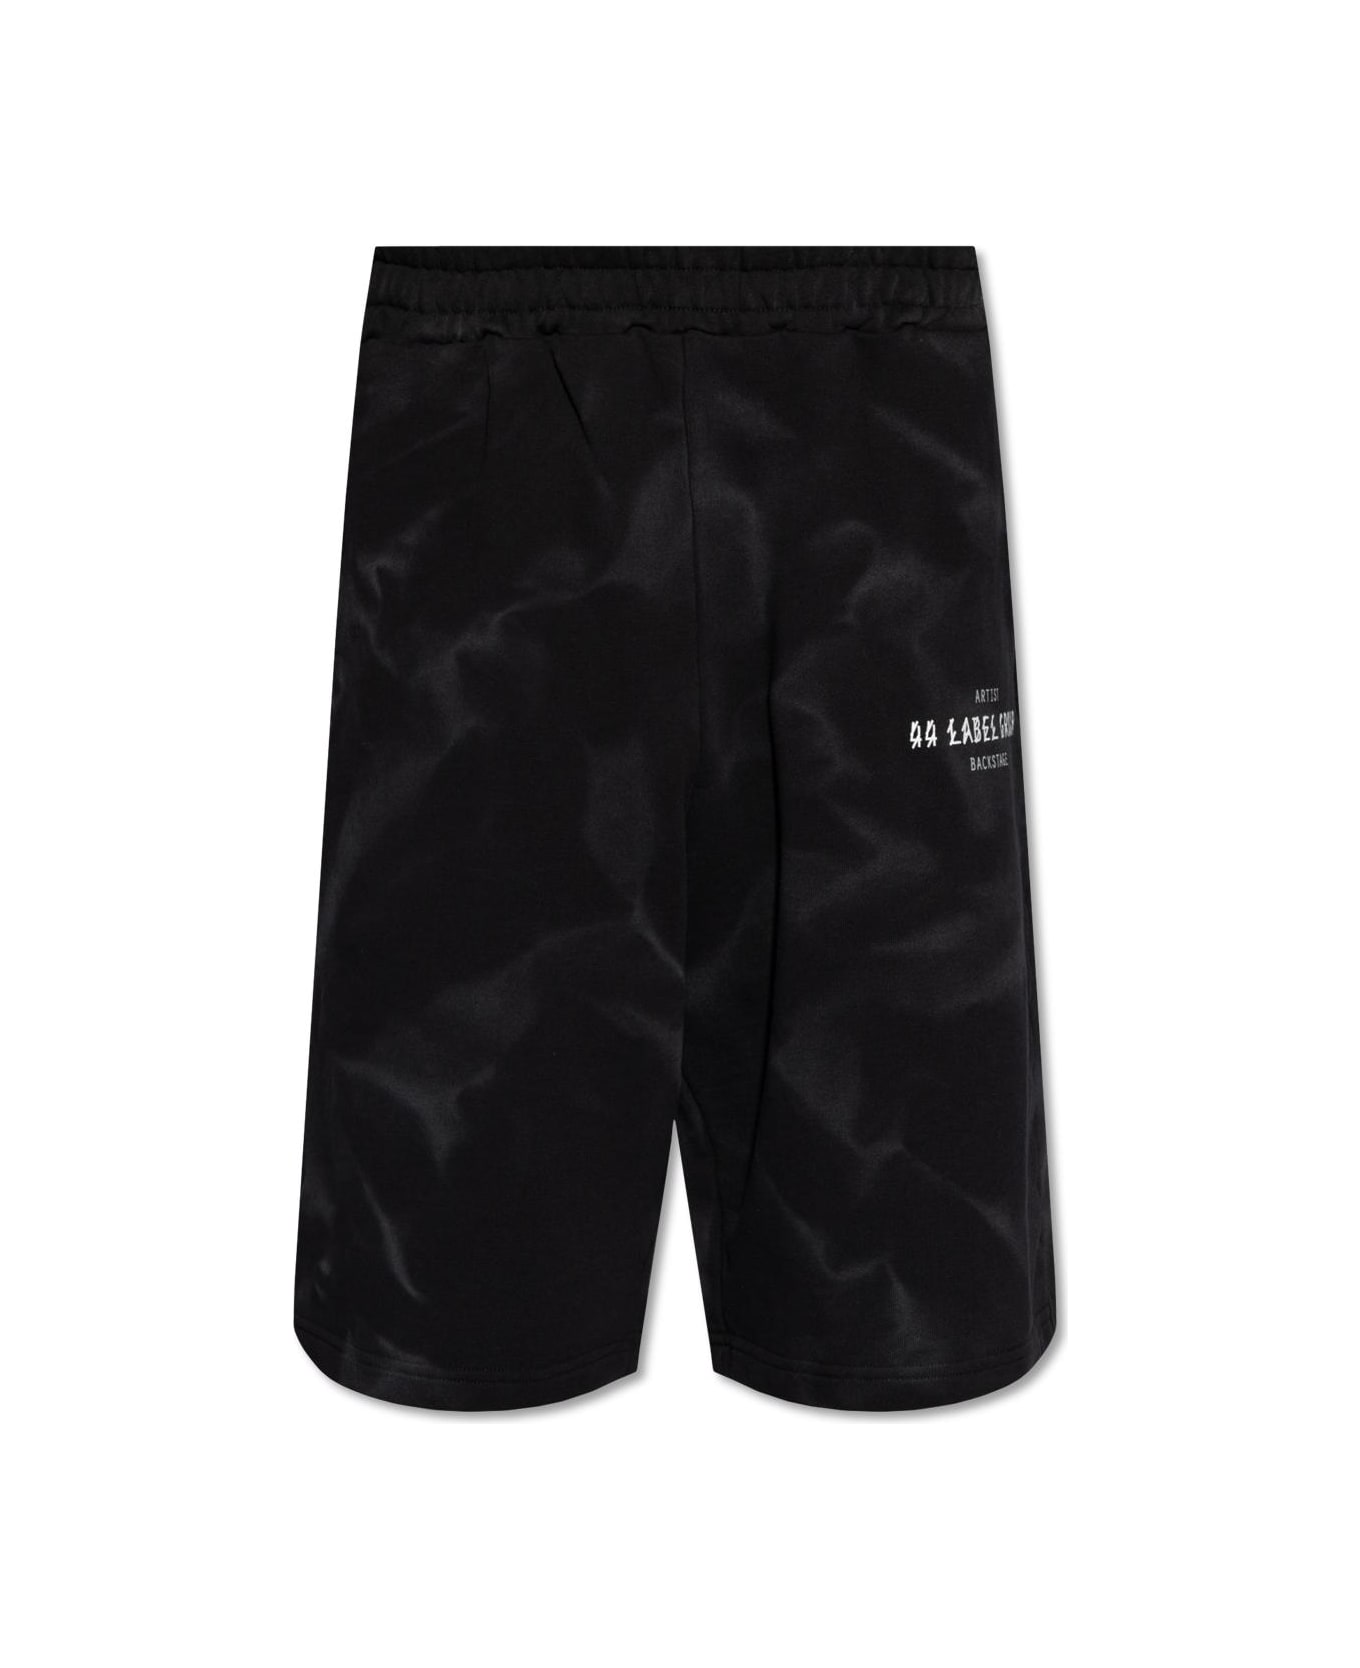 44 Label Group Cotton Shorts With Print - Black